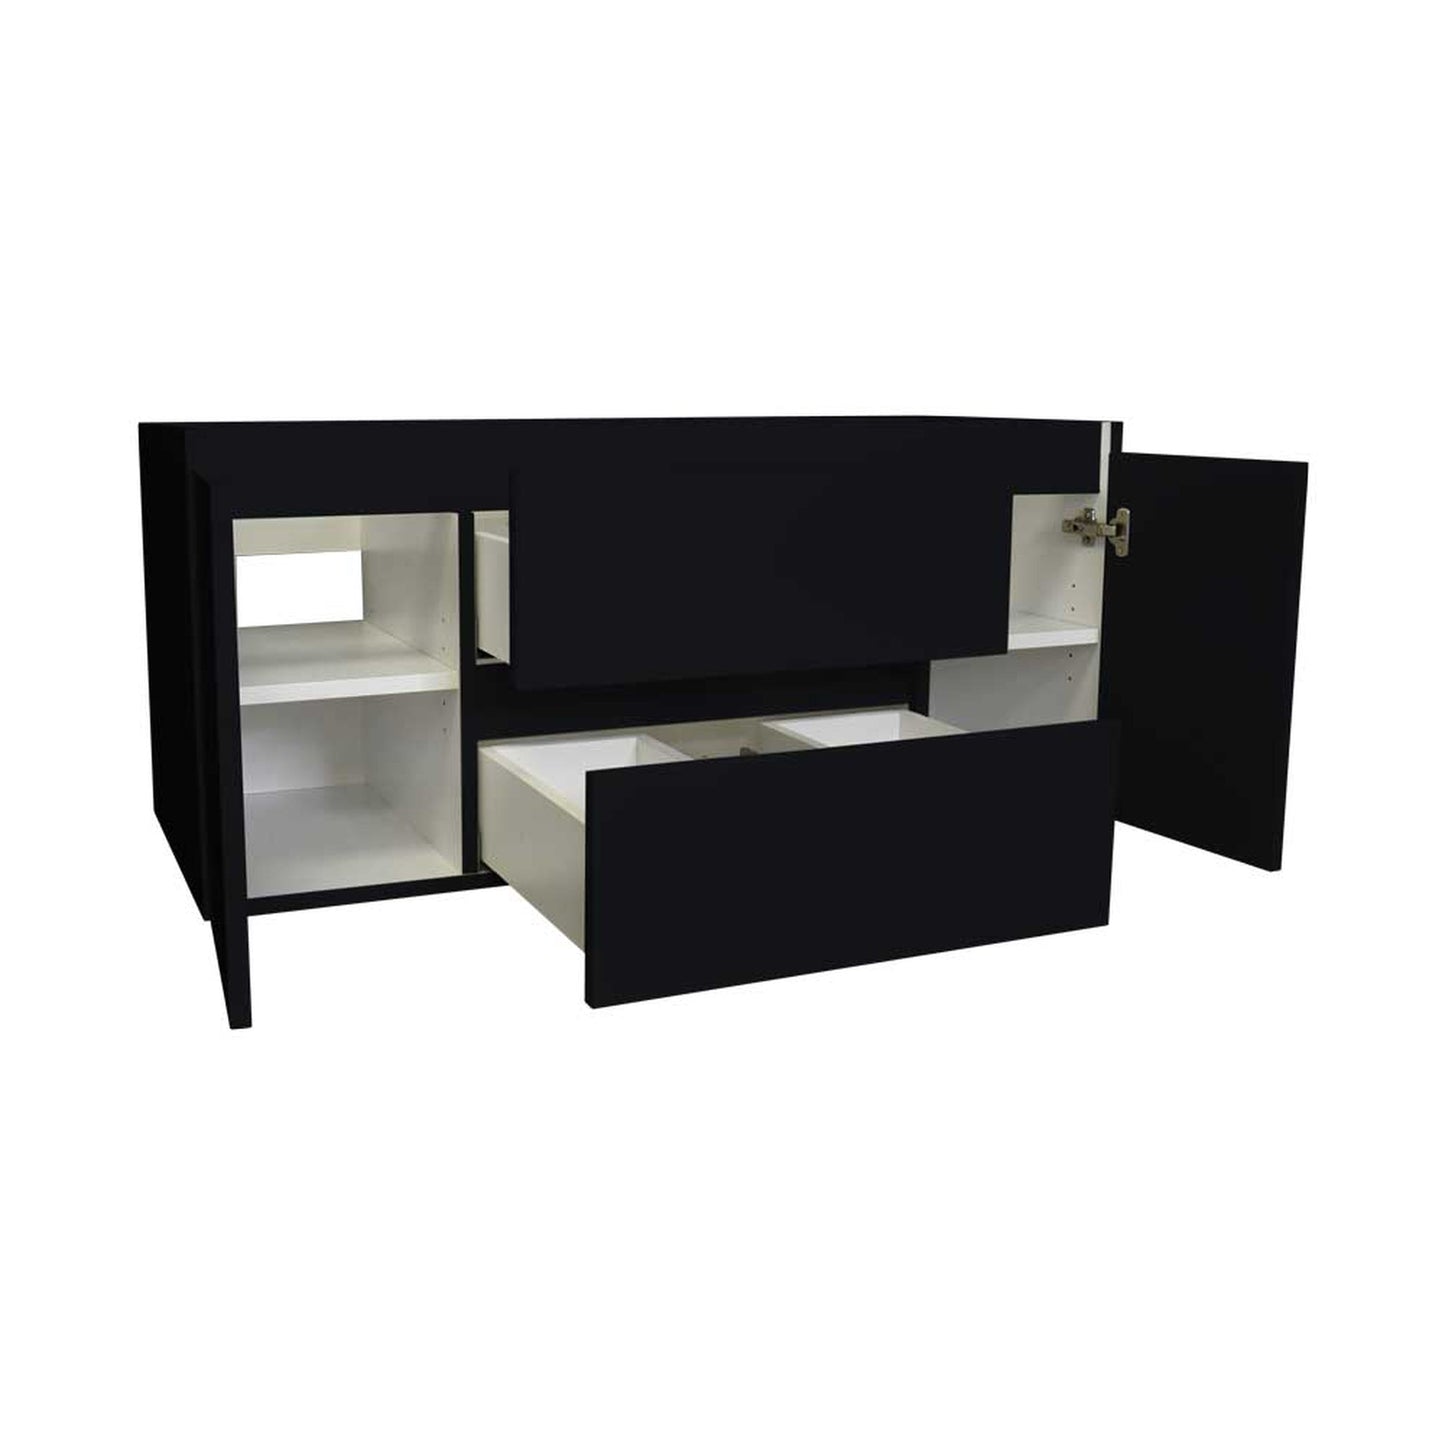 Volpa USA Salt 48" x 20" Black Wall-Mounted Floating Bathroom Vanity Cabinet with Drawers